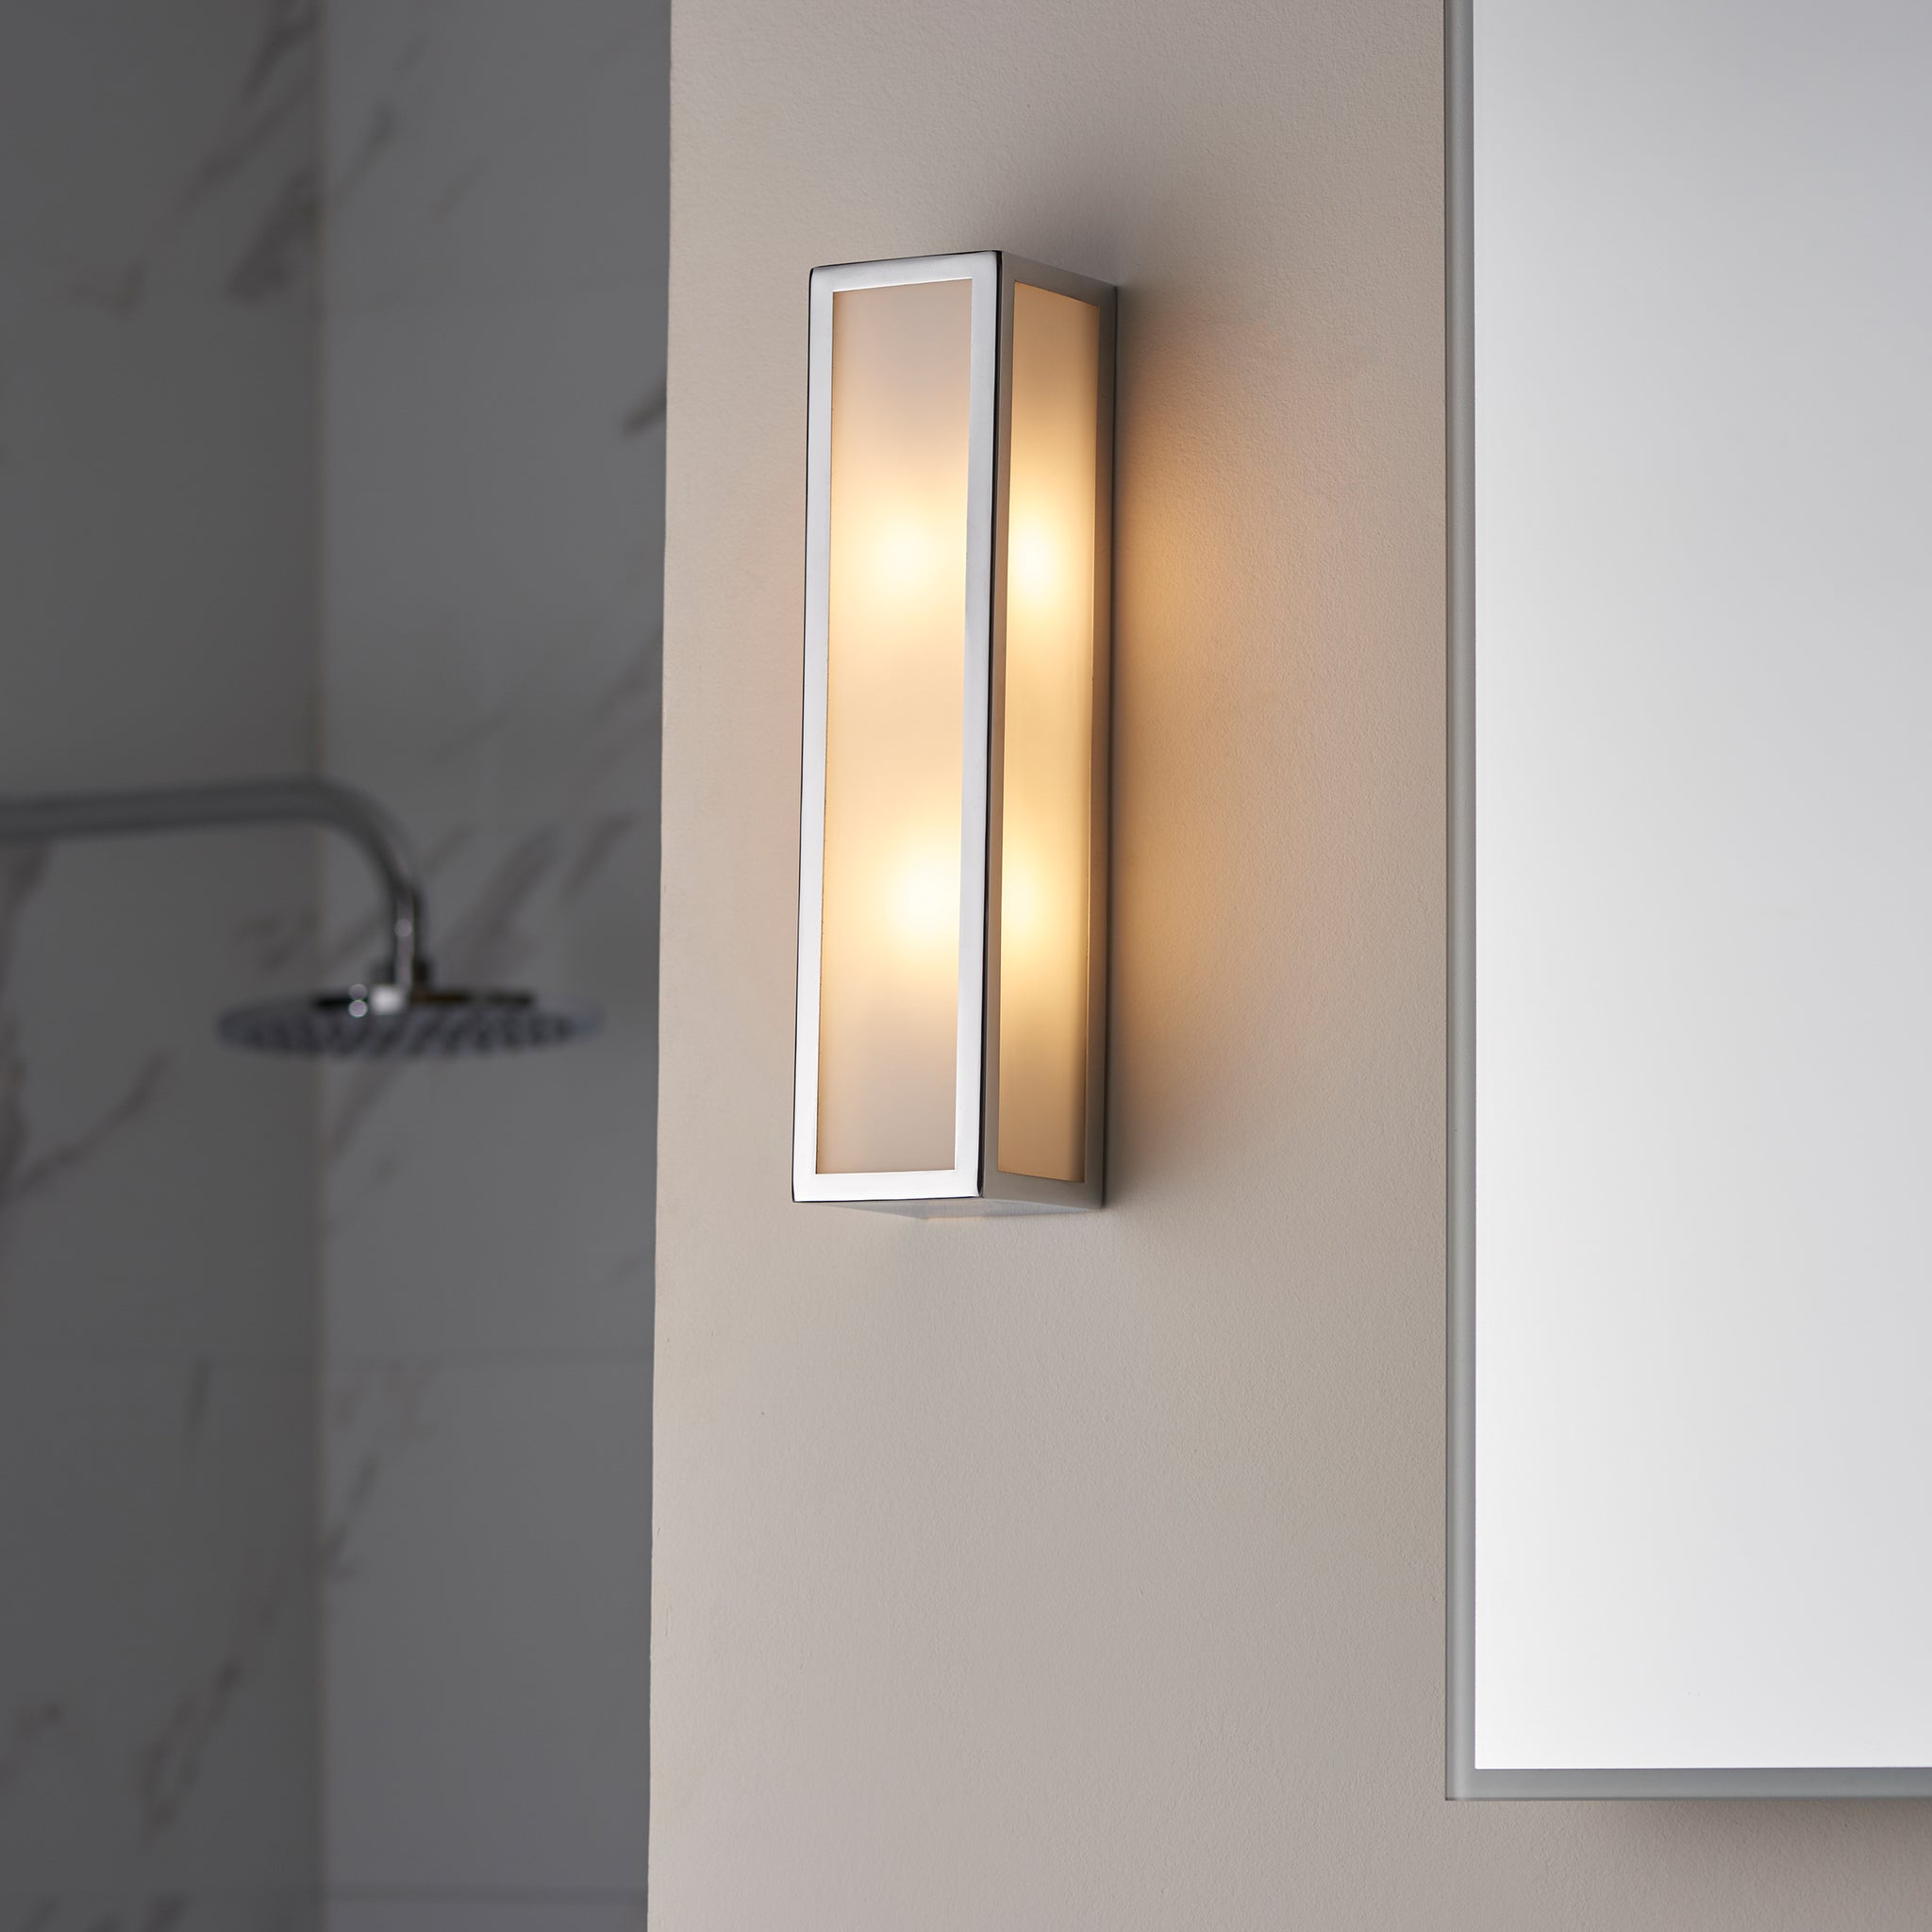 Newman Bathroom 2 Wall Light Chrome Frosted